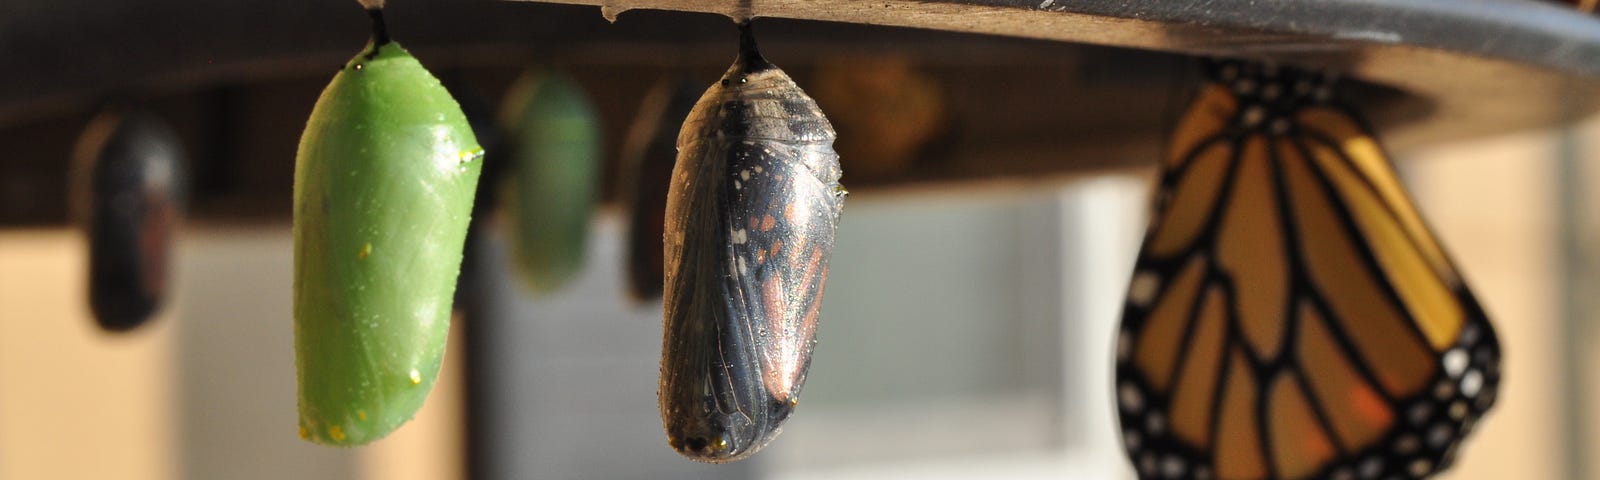 Two butterfly chrysalises, with an adult butterfly hanging next to them.